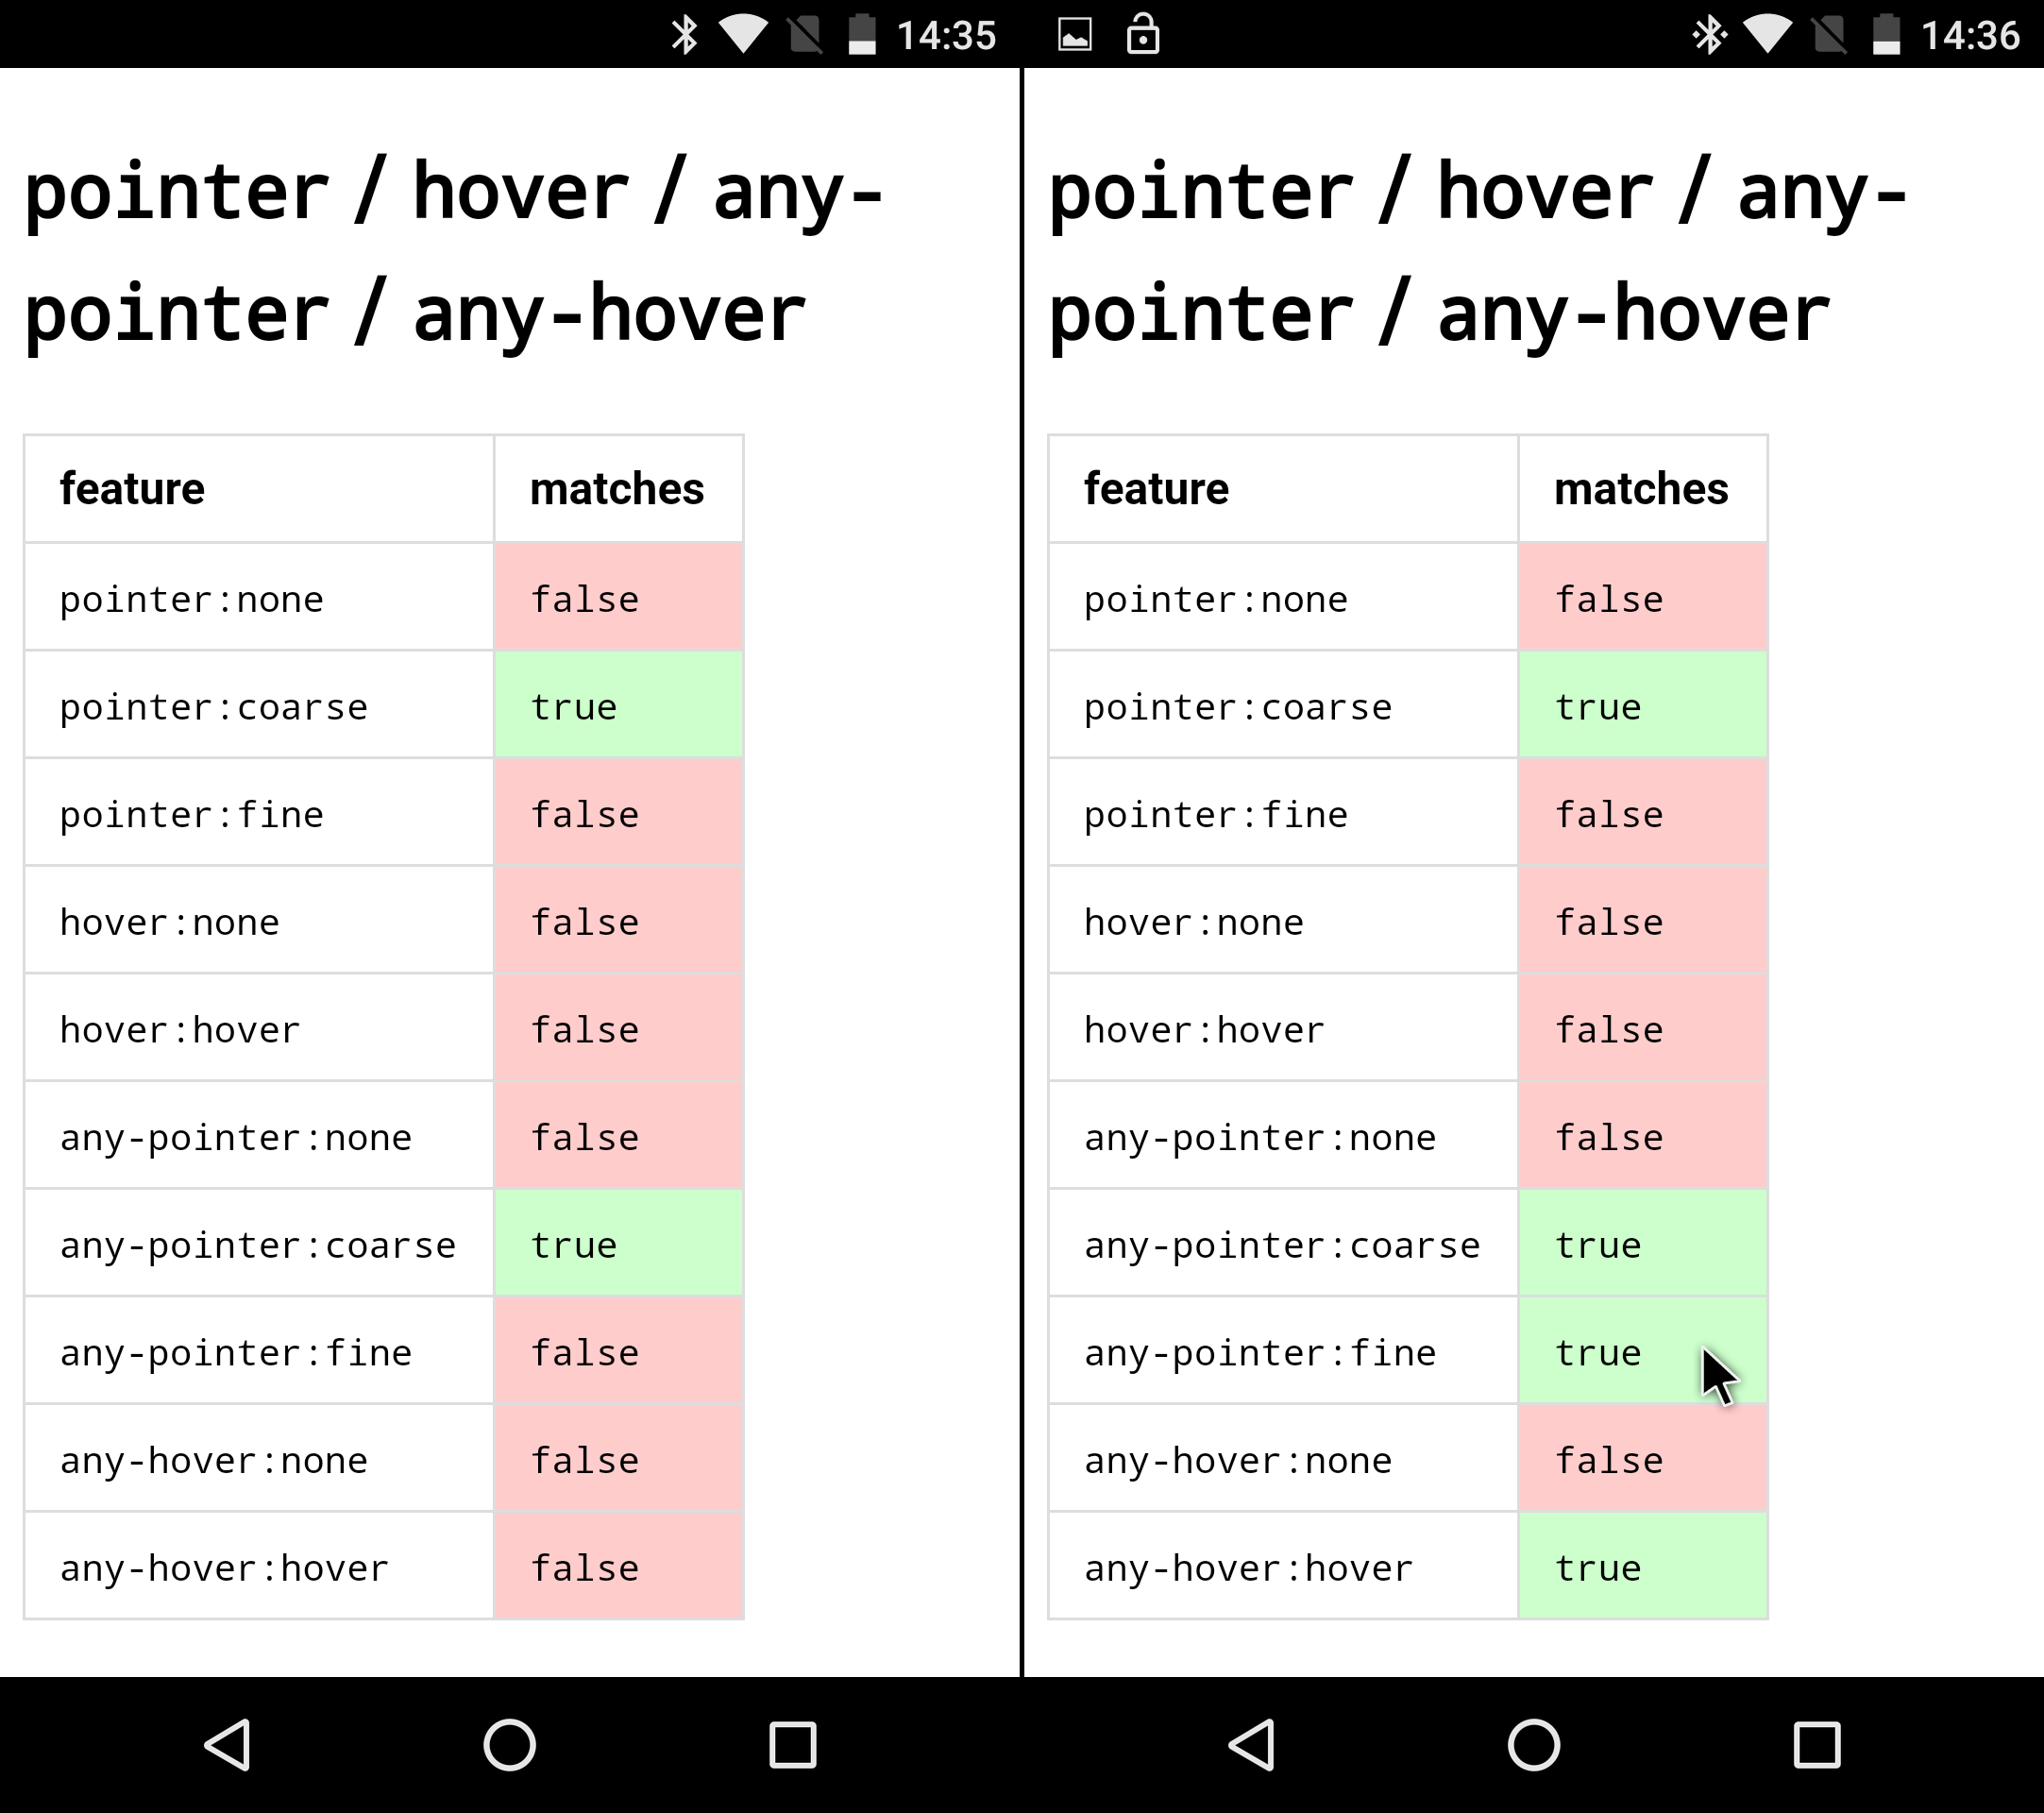 CSS4 Interaction Media Features tests on a touchscreen phone, with and without a paired bluetooth mouse - primary input remains touchscreen (so pointer:coarse and hover:on-demand), but additional capabilities of mouse are detected (any-pointer:fine and hover:hover also evaluated to true)